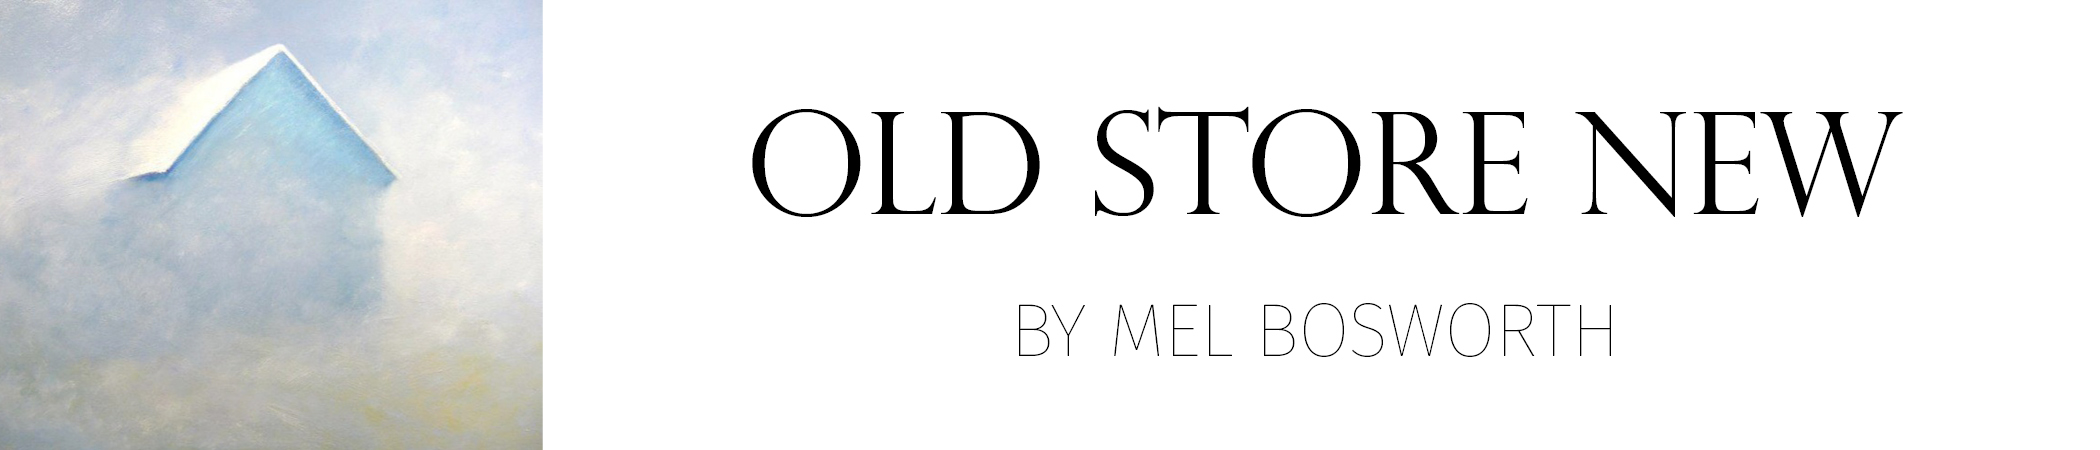 Old Store New by Mel Bosworth